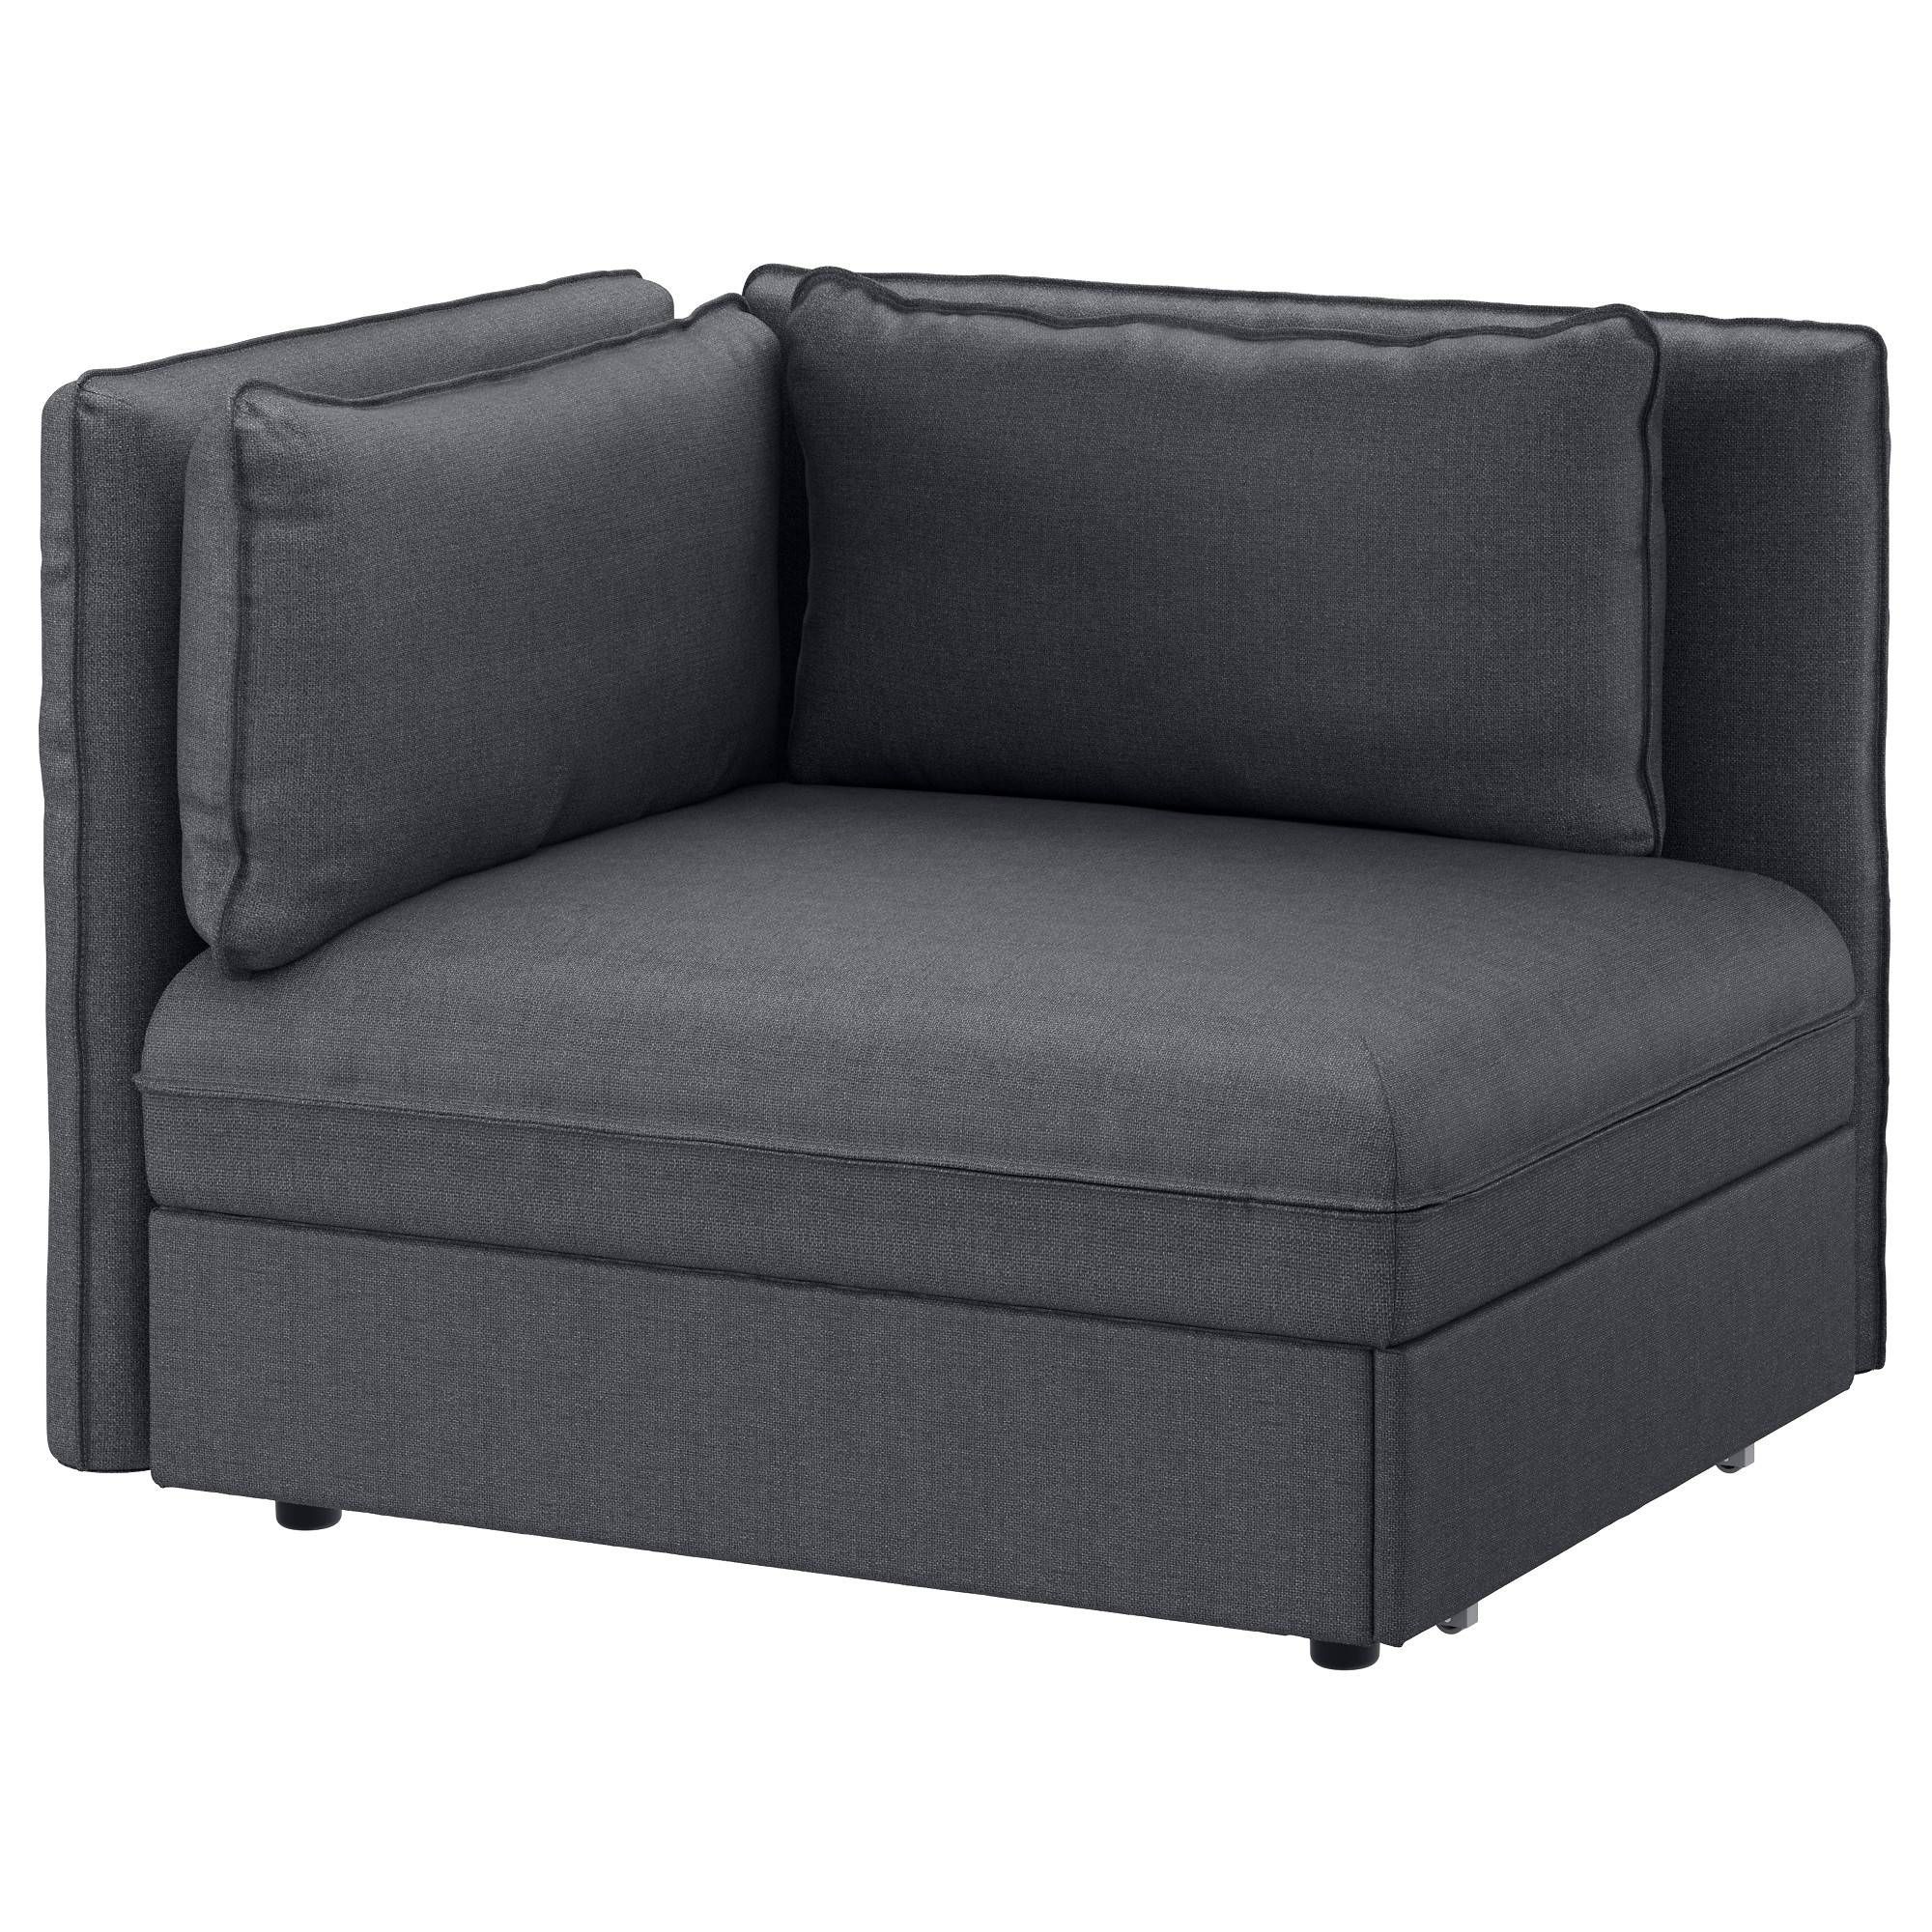 Sofas Center : Sofa Chair Single At Walmart Chairs For Sale Best With Folding Sofa Chairs (View 9 of 30)